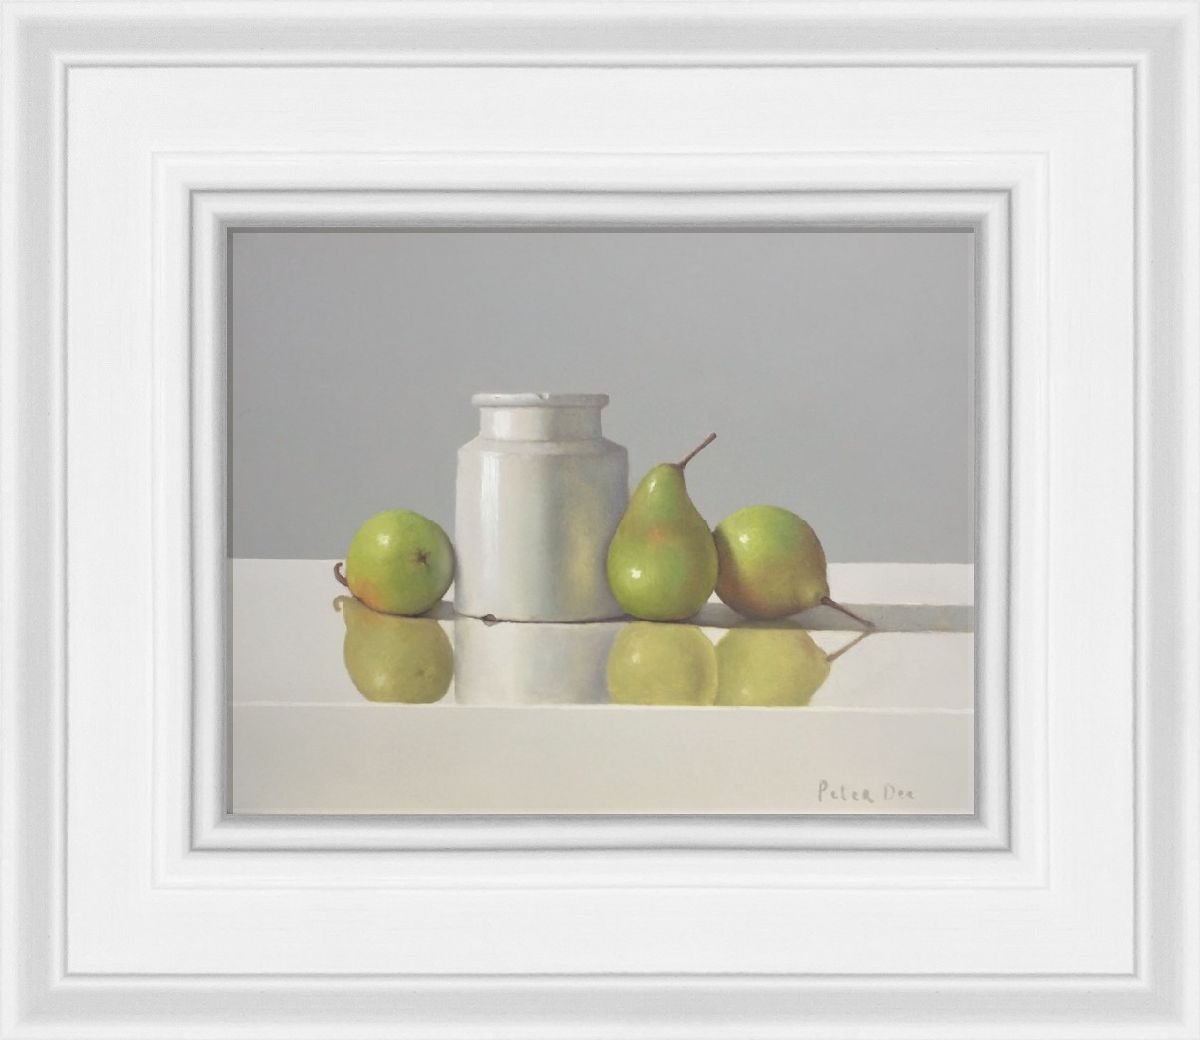 Pears with Stoneware Jar by Peter Dee